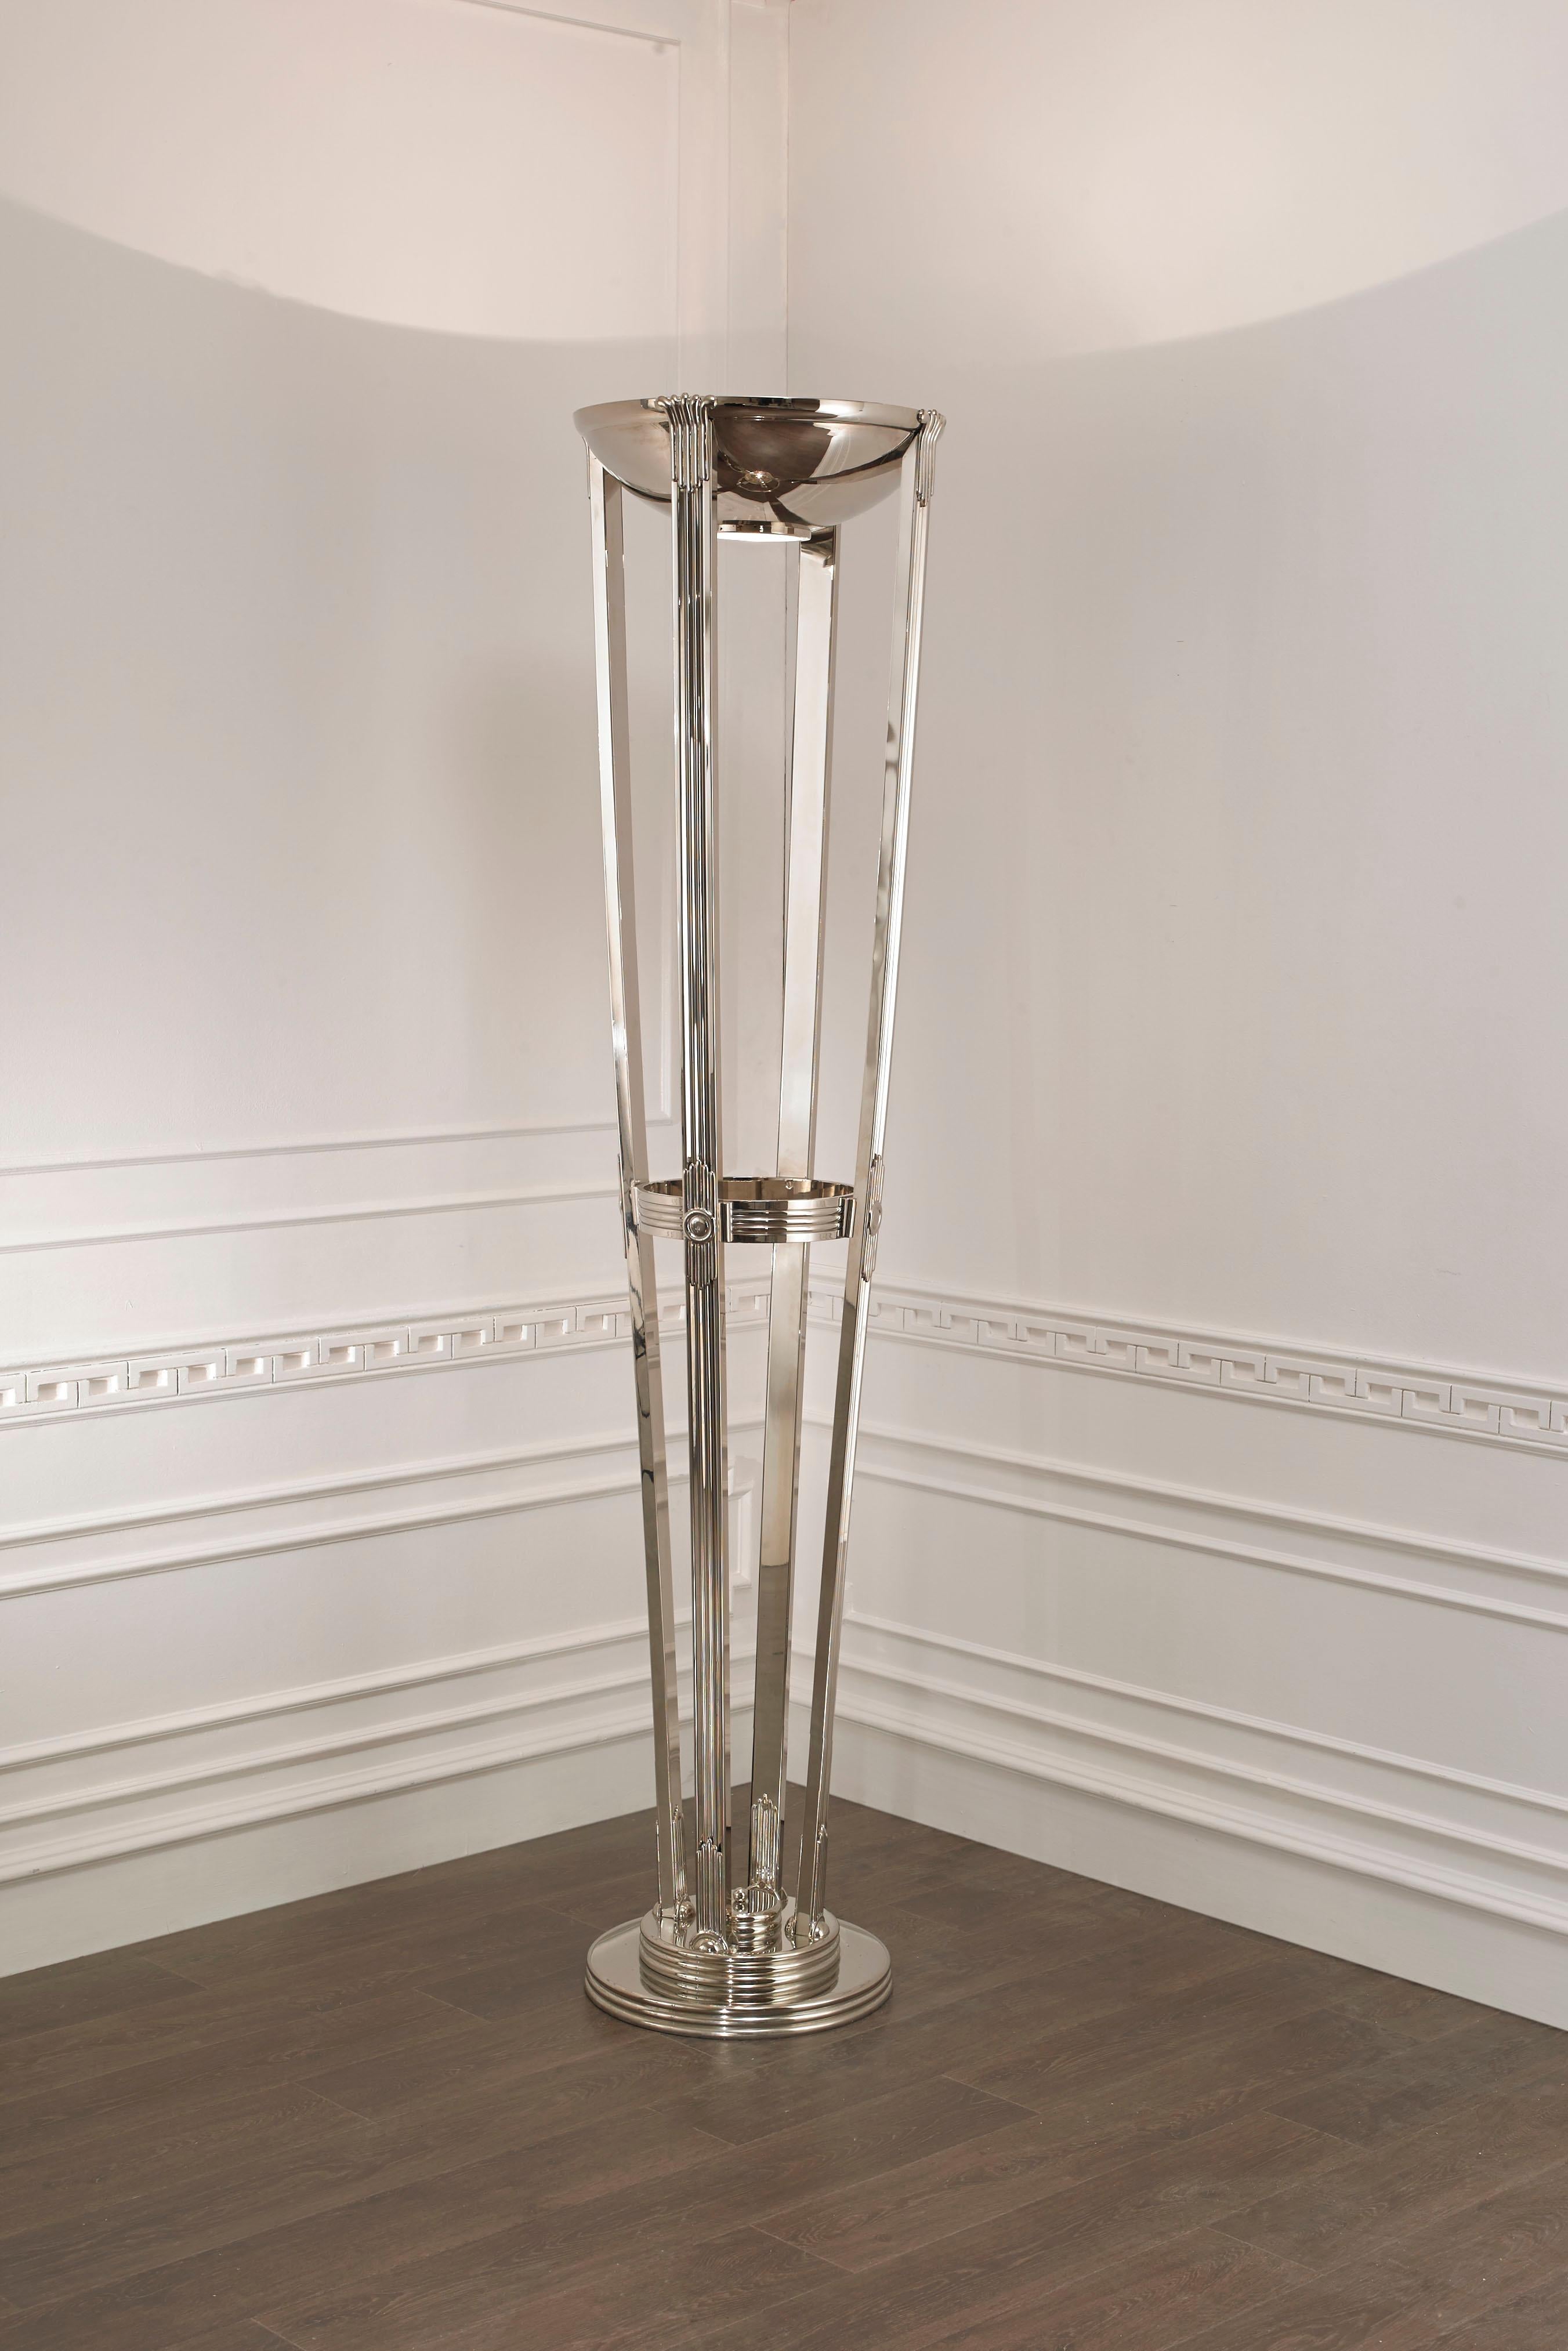 Bronze Art Deco Floor Lamp can be proposed with nickel finish, Gold finish or old bronze.